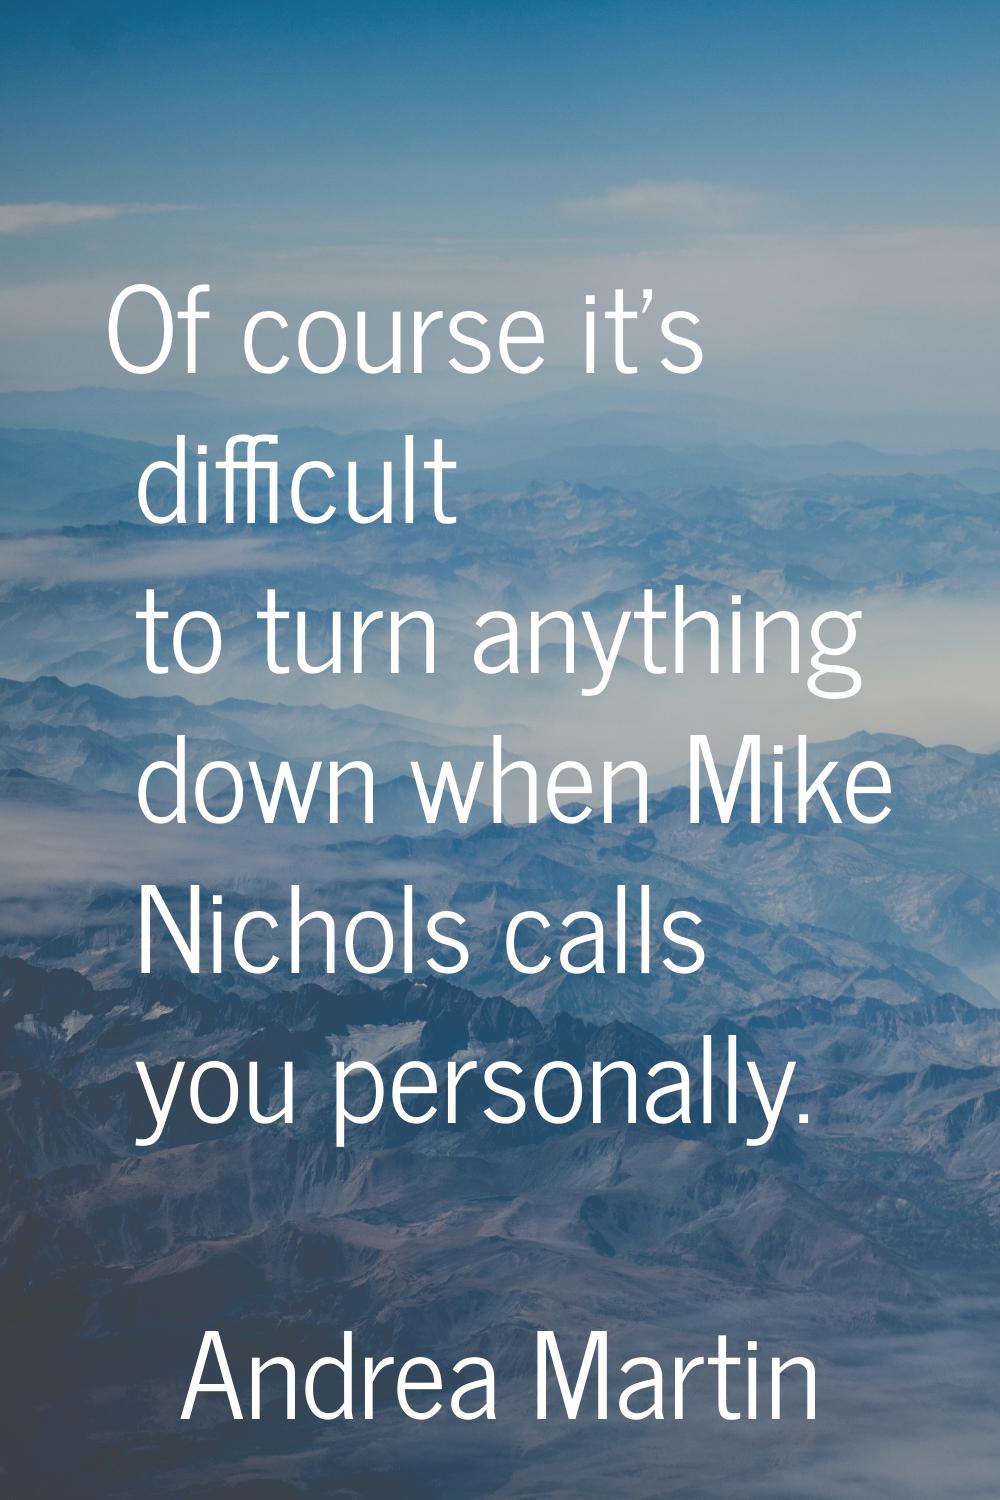 Of course it's difficult to turn anything down when Mike Nichols calls you personally.